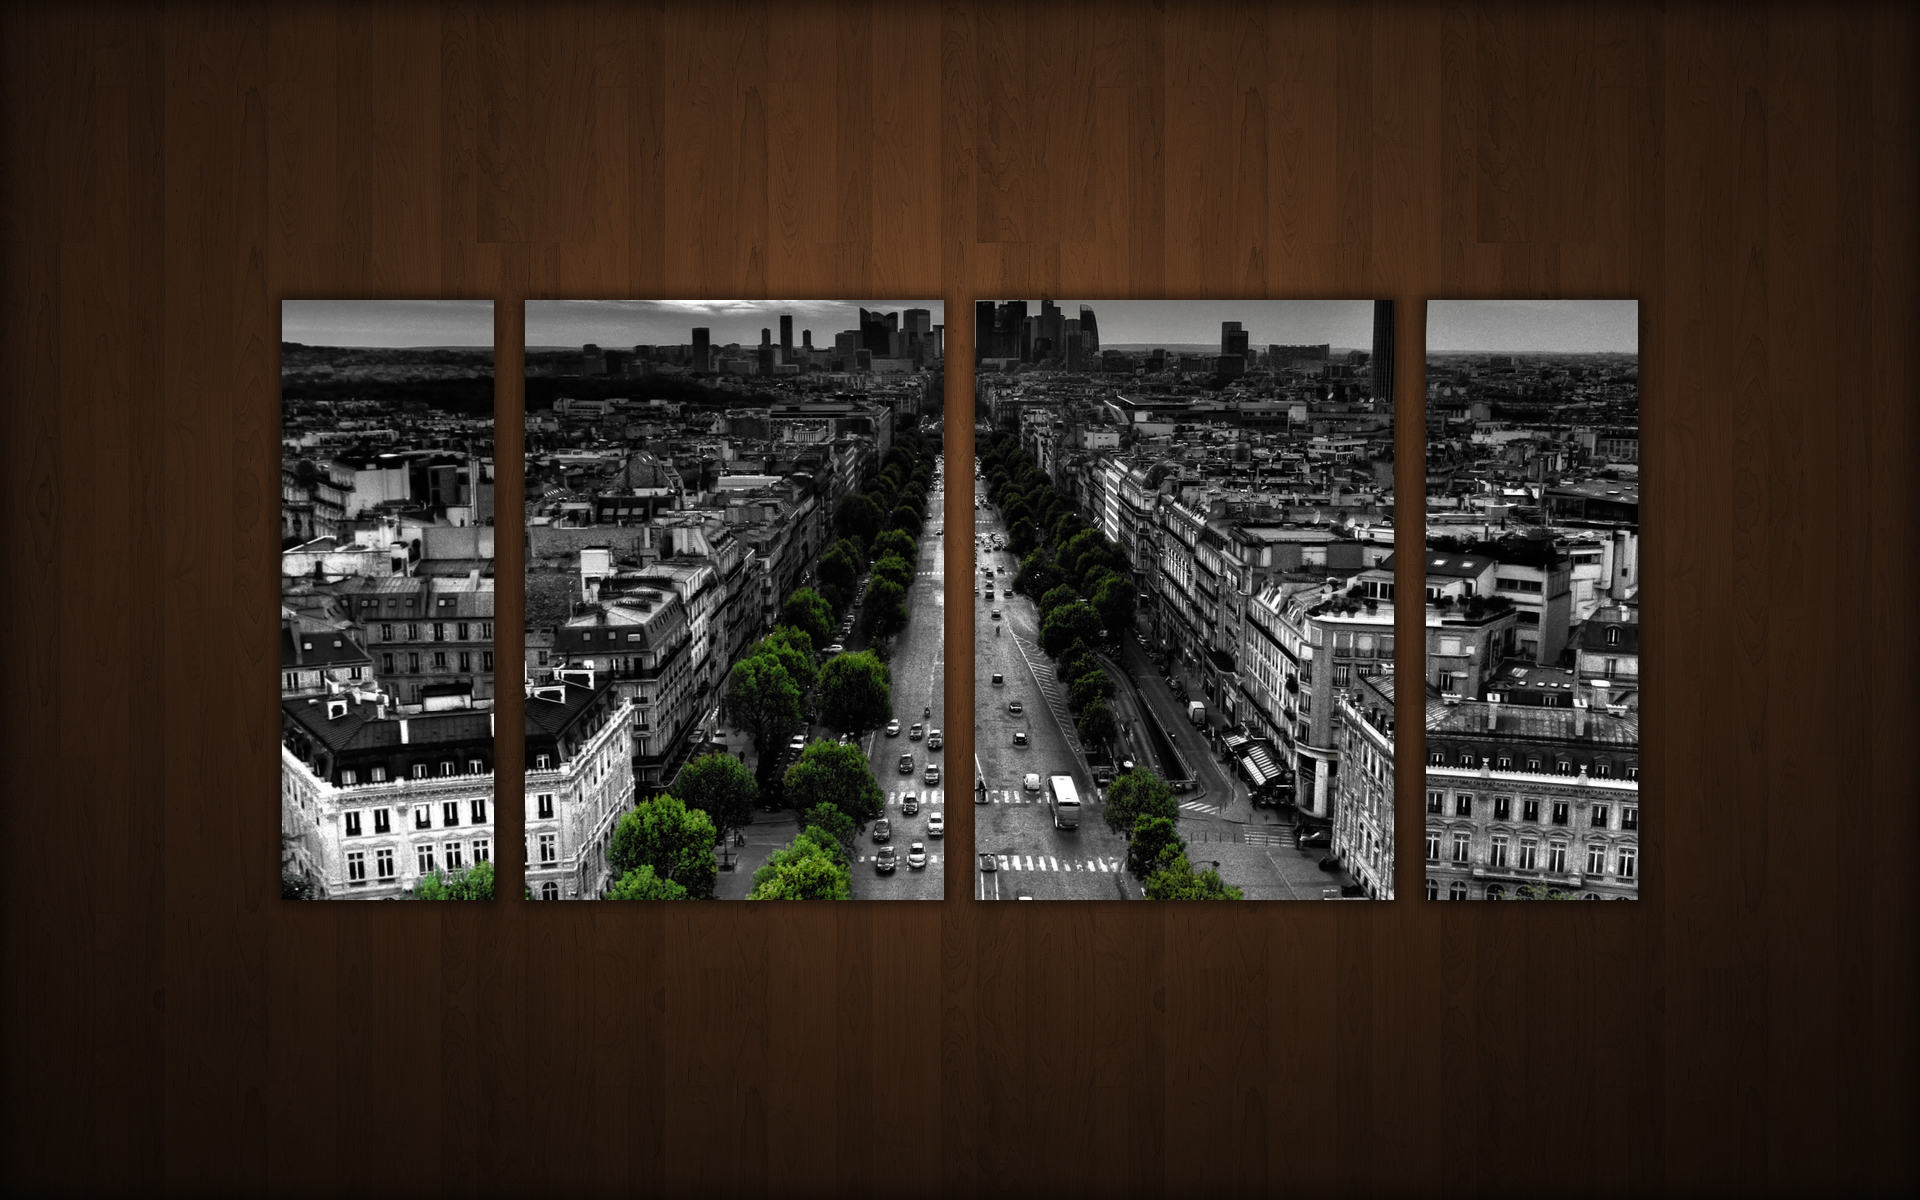 Parisian skyline with artistic touch, showcasing the beauty of France.